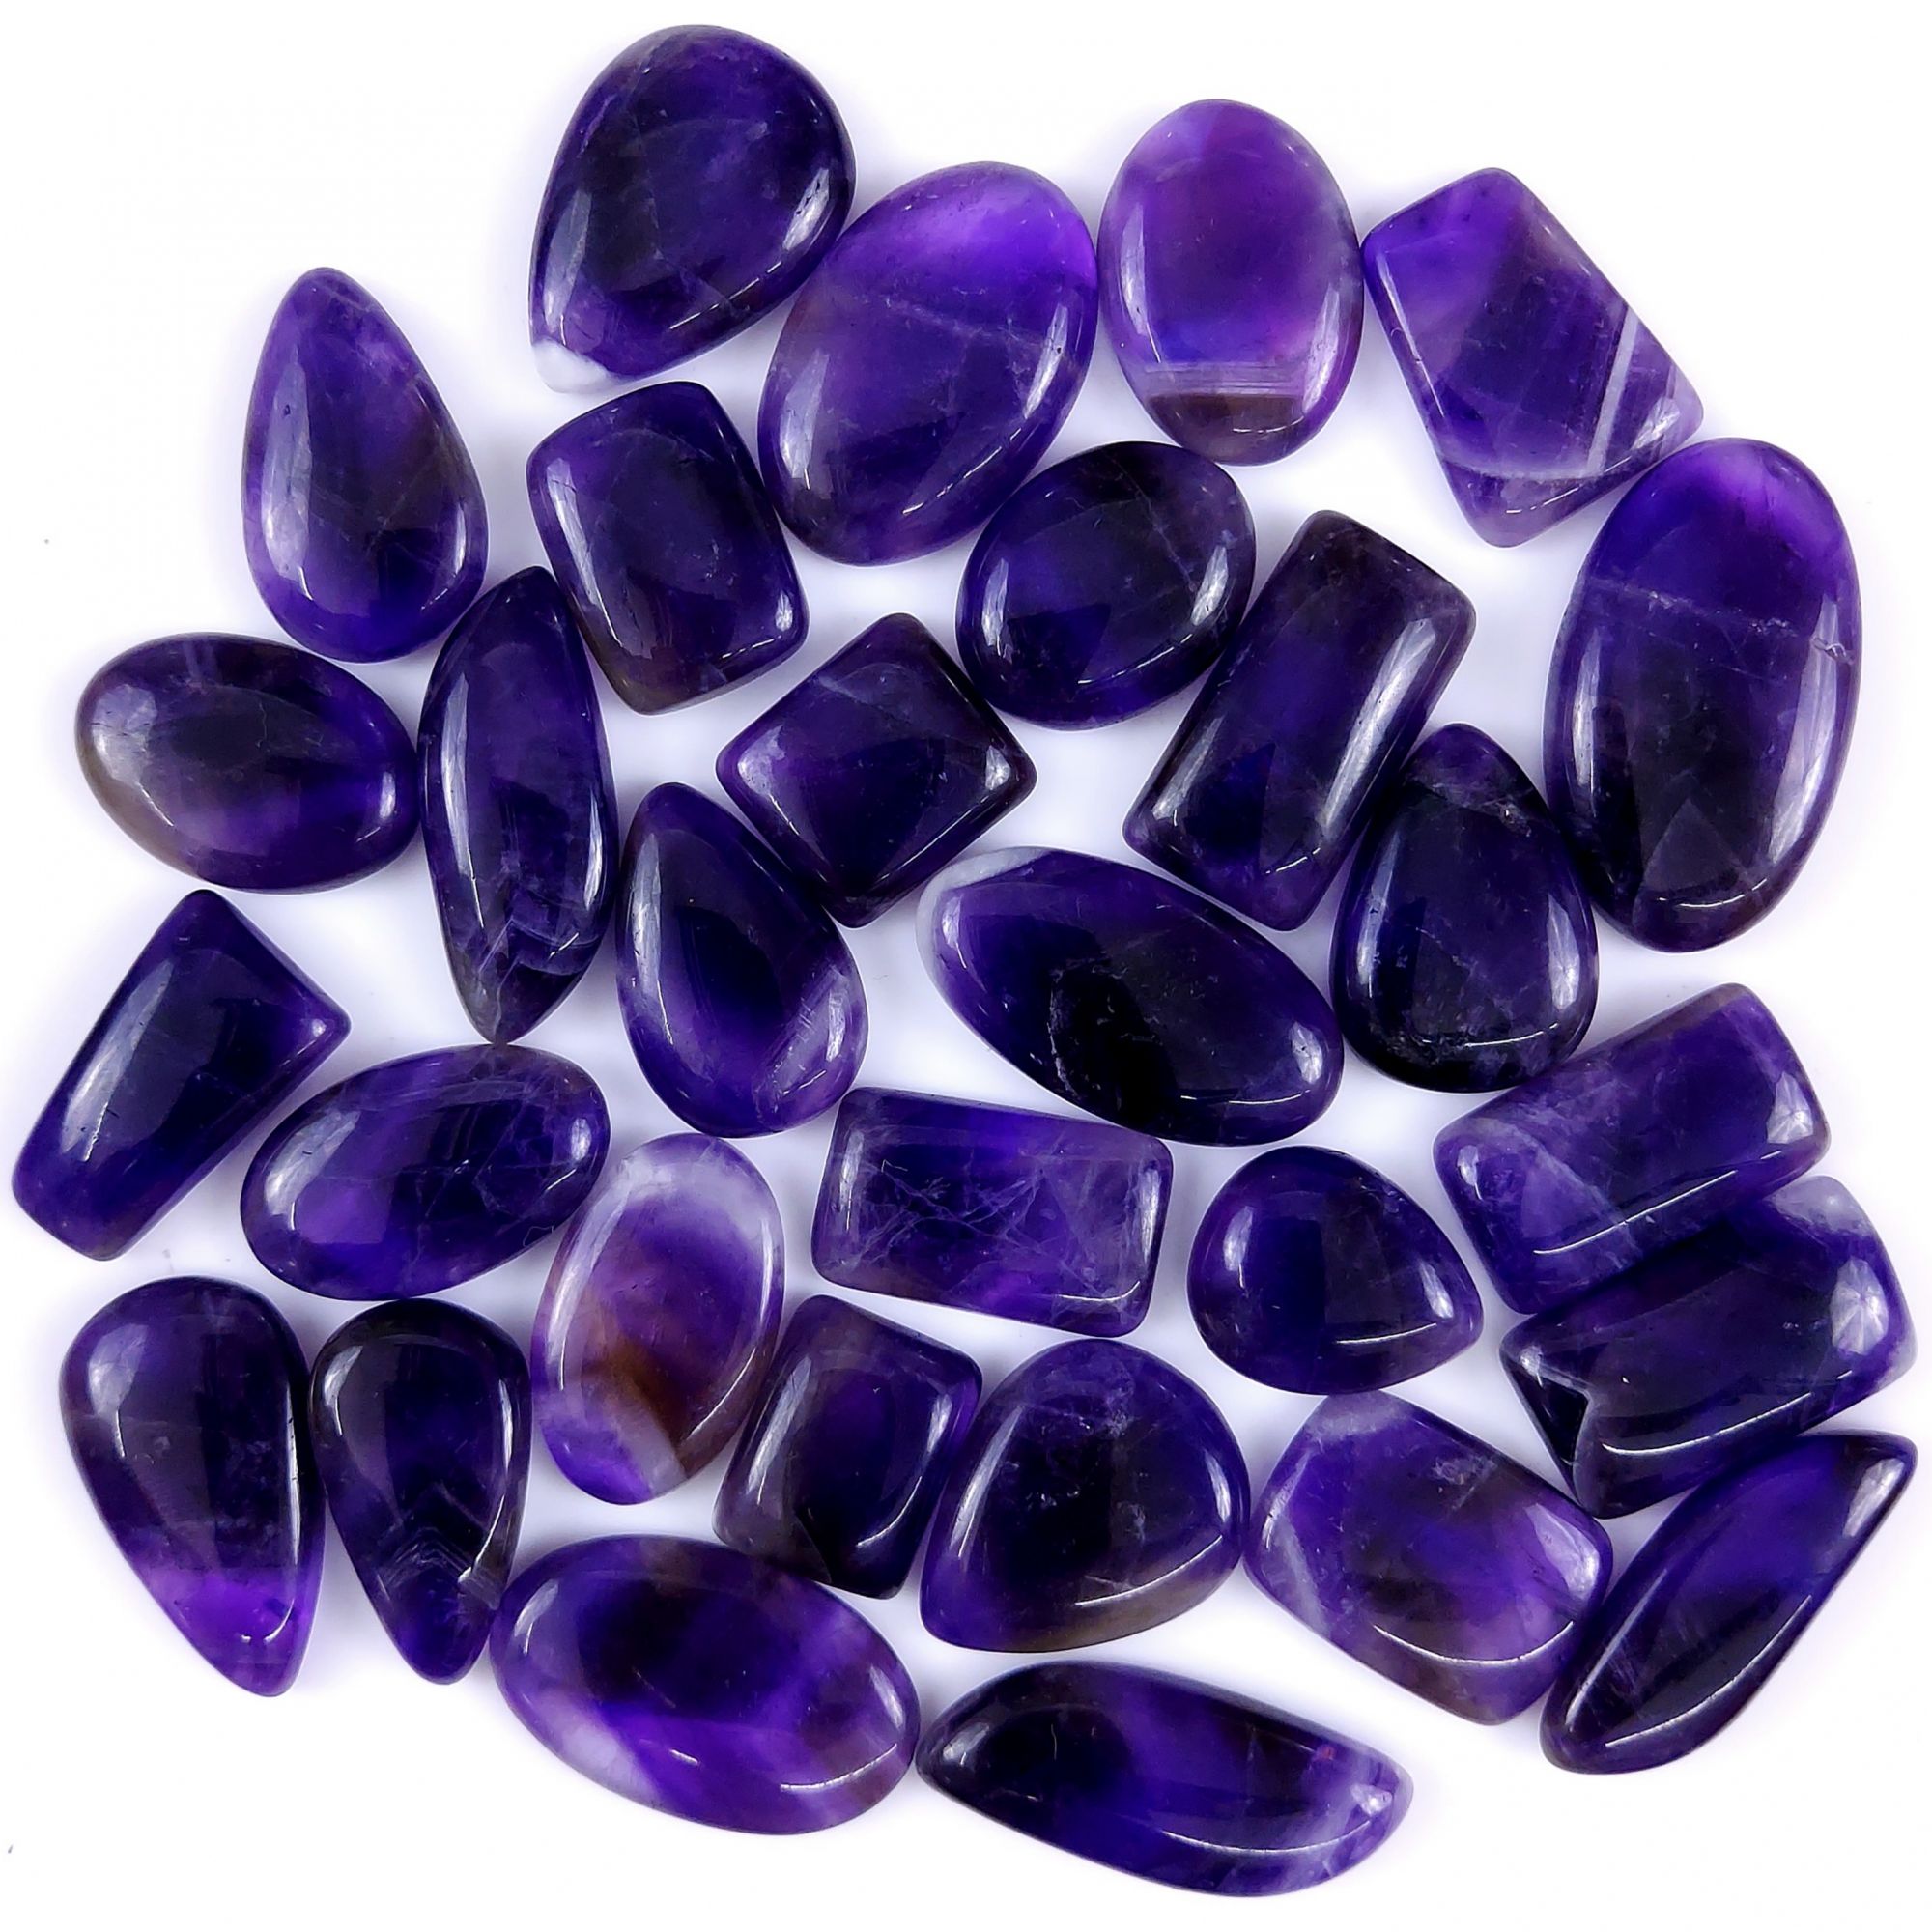 30Pcs 526Cts Natural Amethyst Cabochon lot Gemstone Purple Crystal Mix Shape Loose Gemstone beads for jewelry Making 32z18 18x14mm #7507